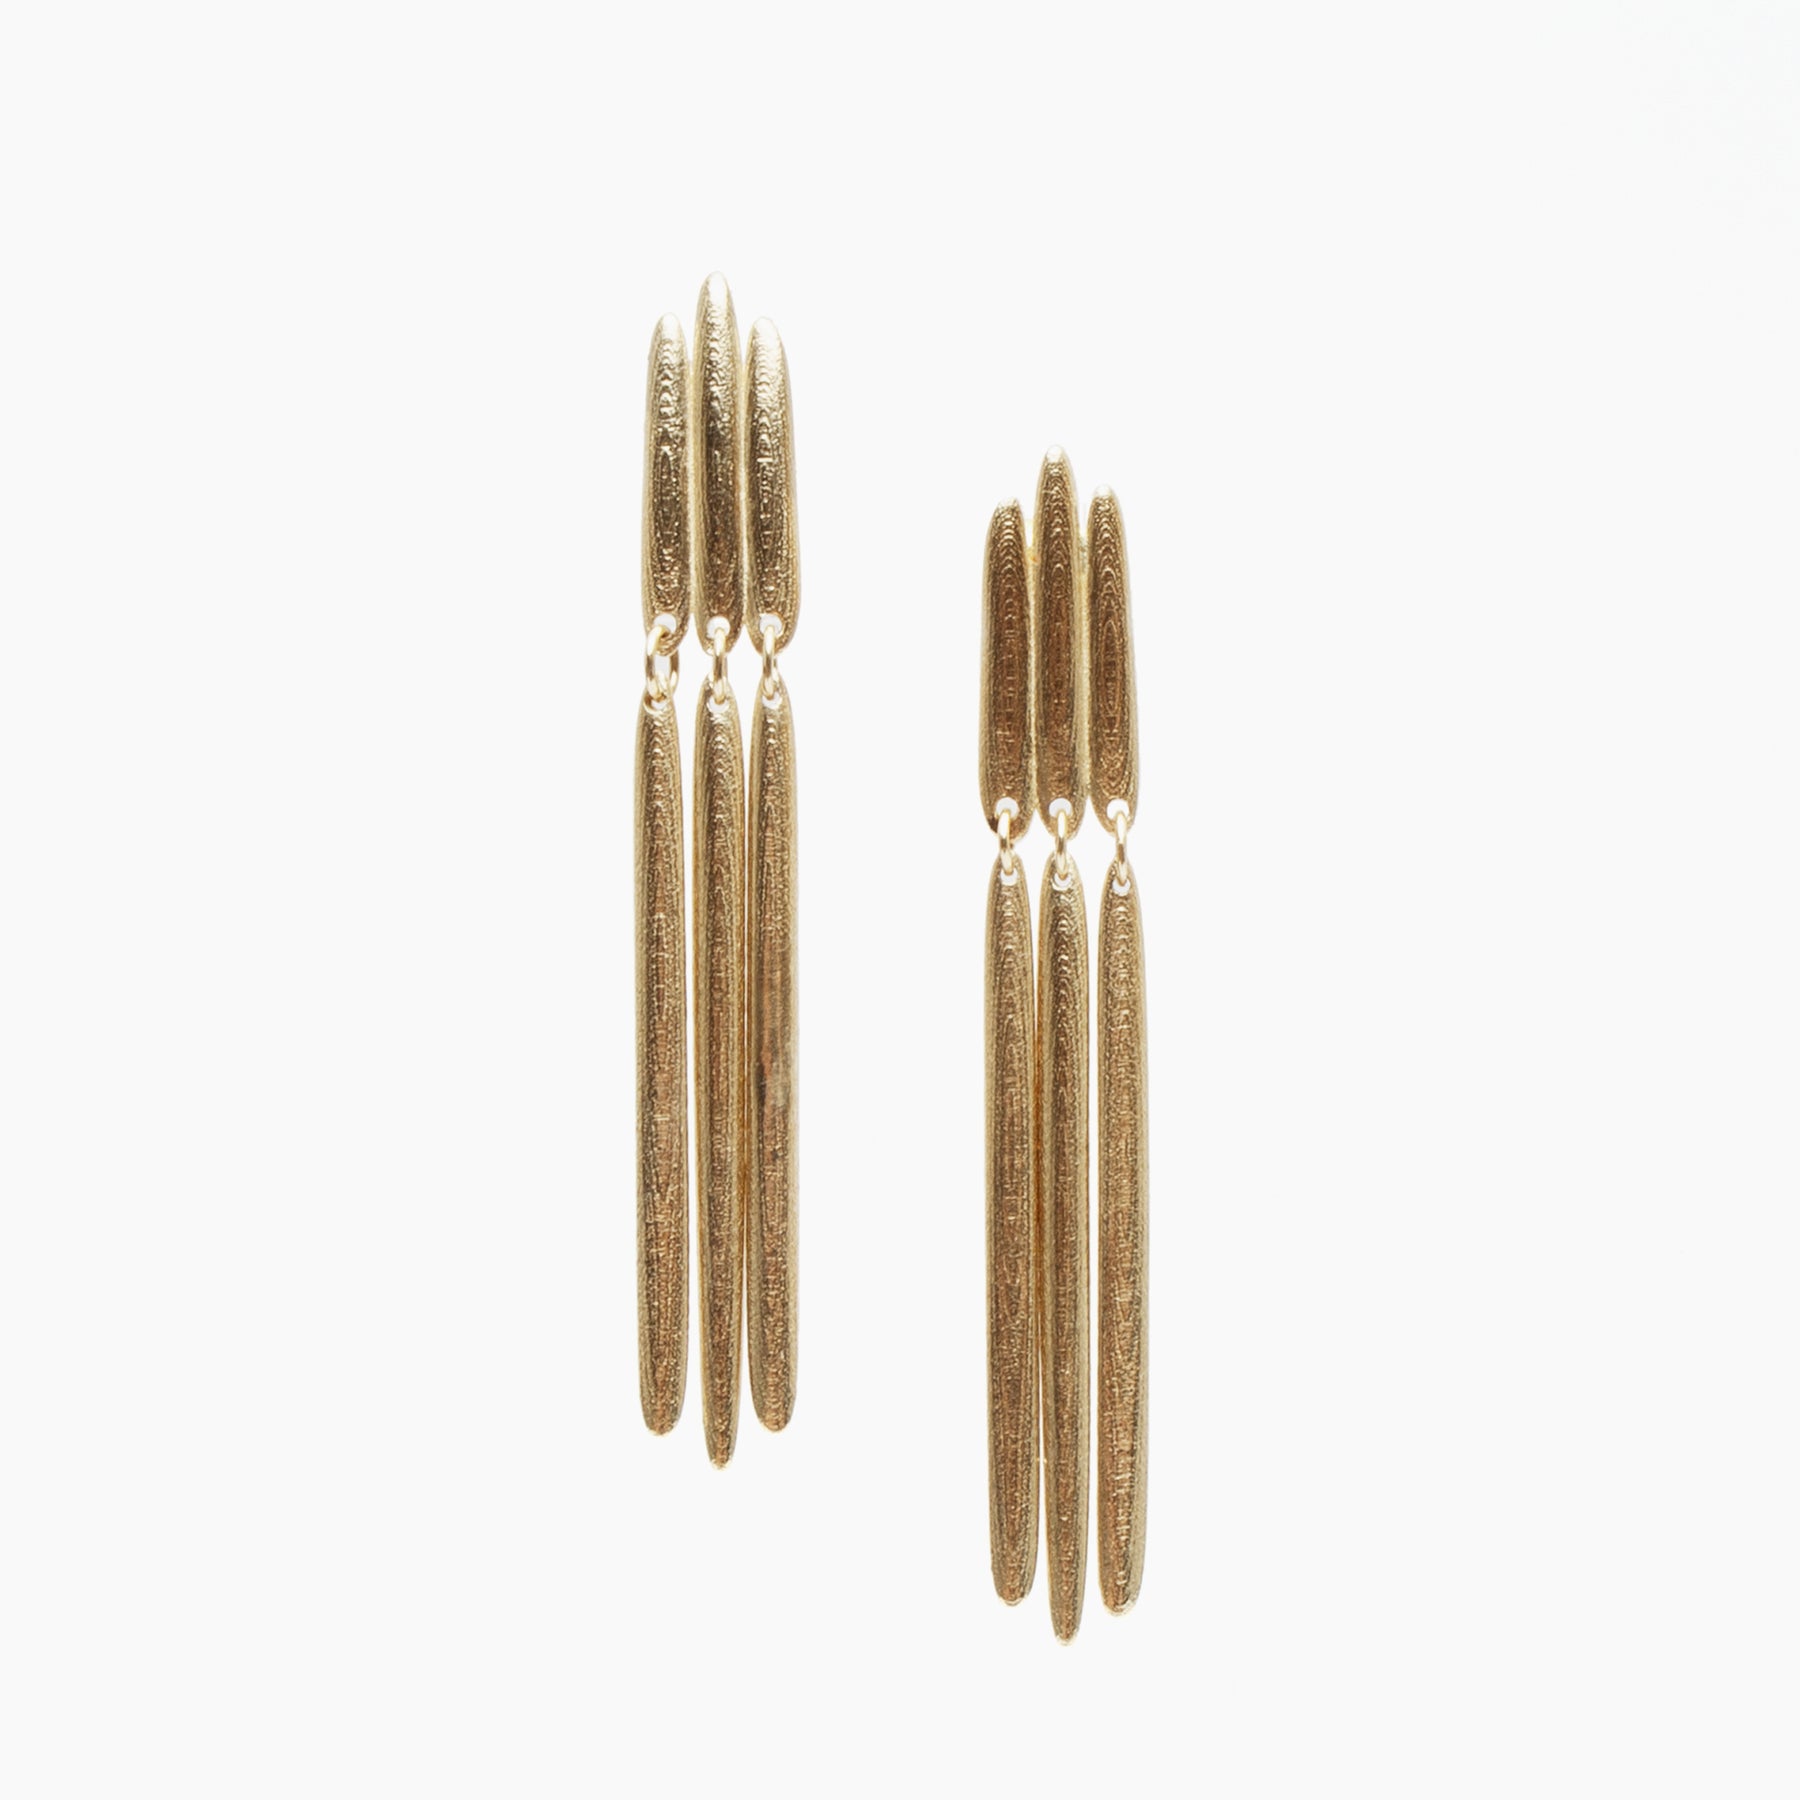 14k yellow gold earrings by Portland jewelry designer Betsy & Iya for Fiina featuring three organically shaped cylinders near the ear and three dangling cylinders hanging below.